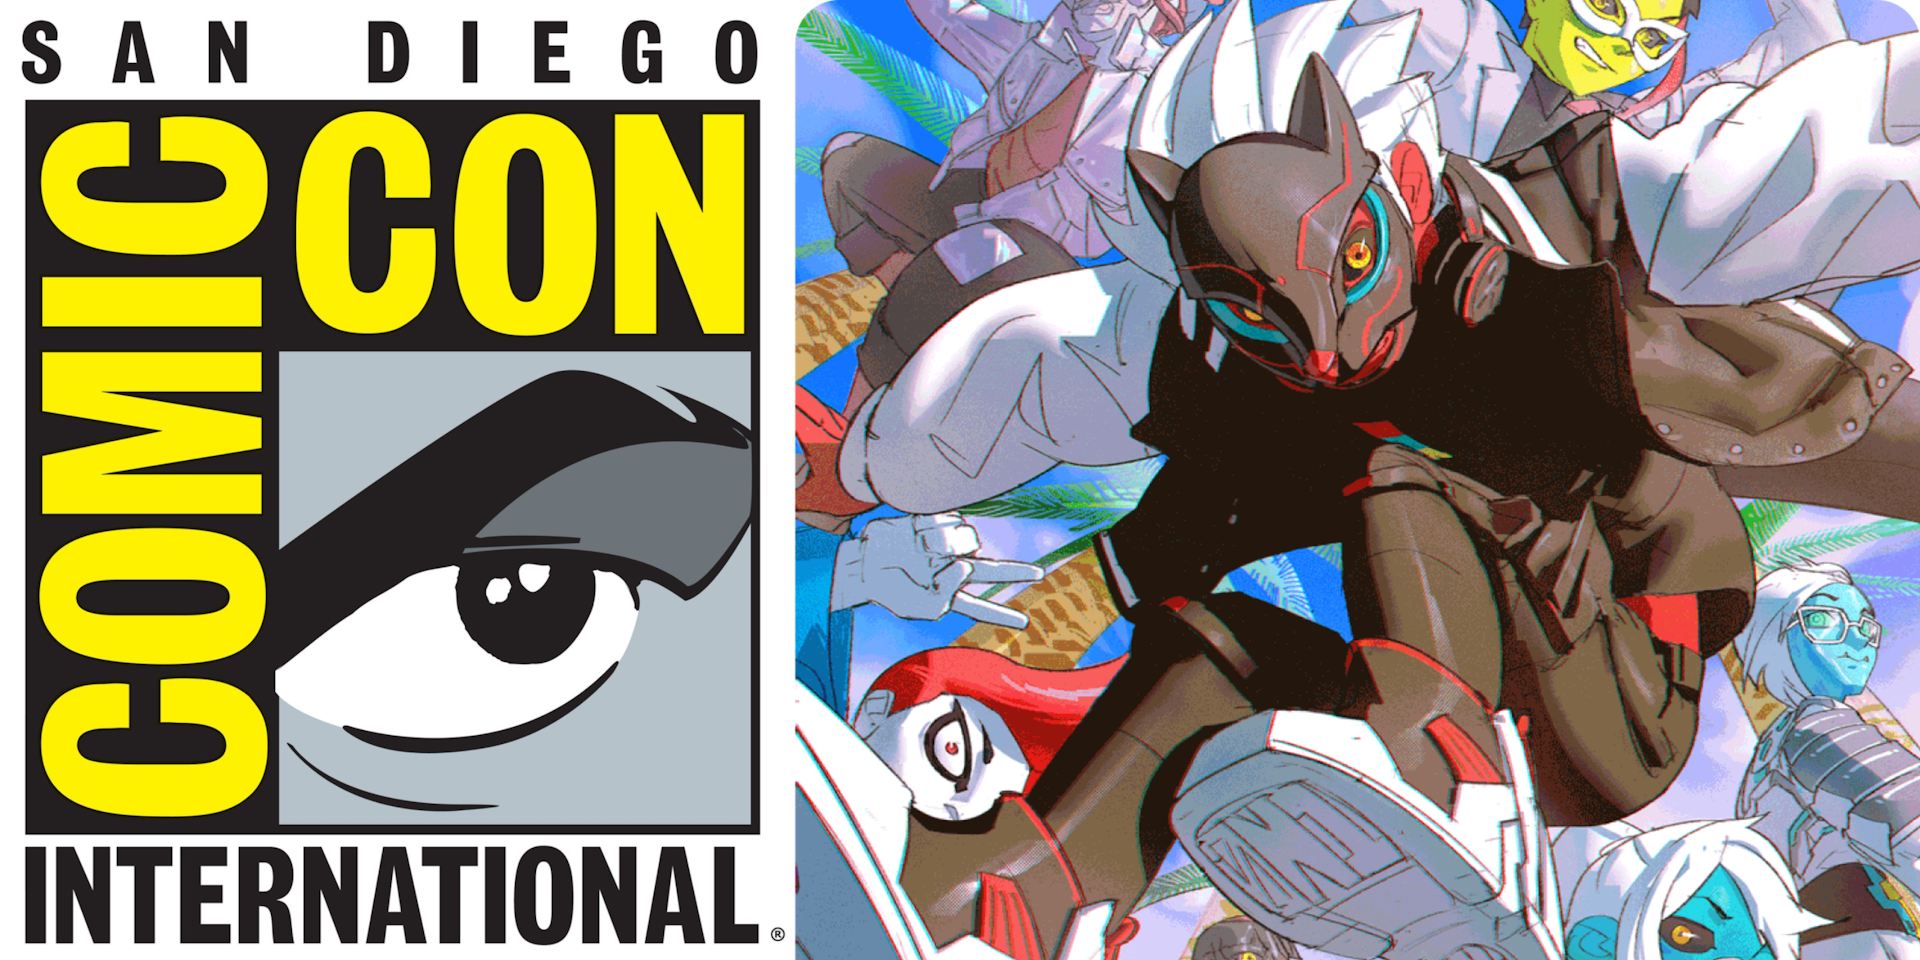 0N1 Force Returns to San Diego Comic-Con in Style